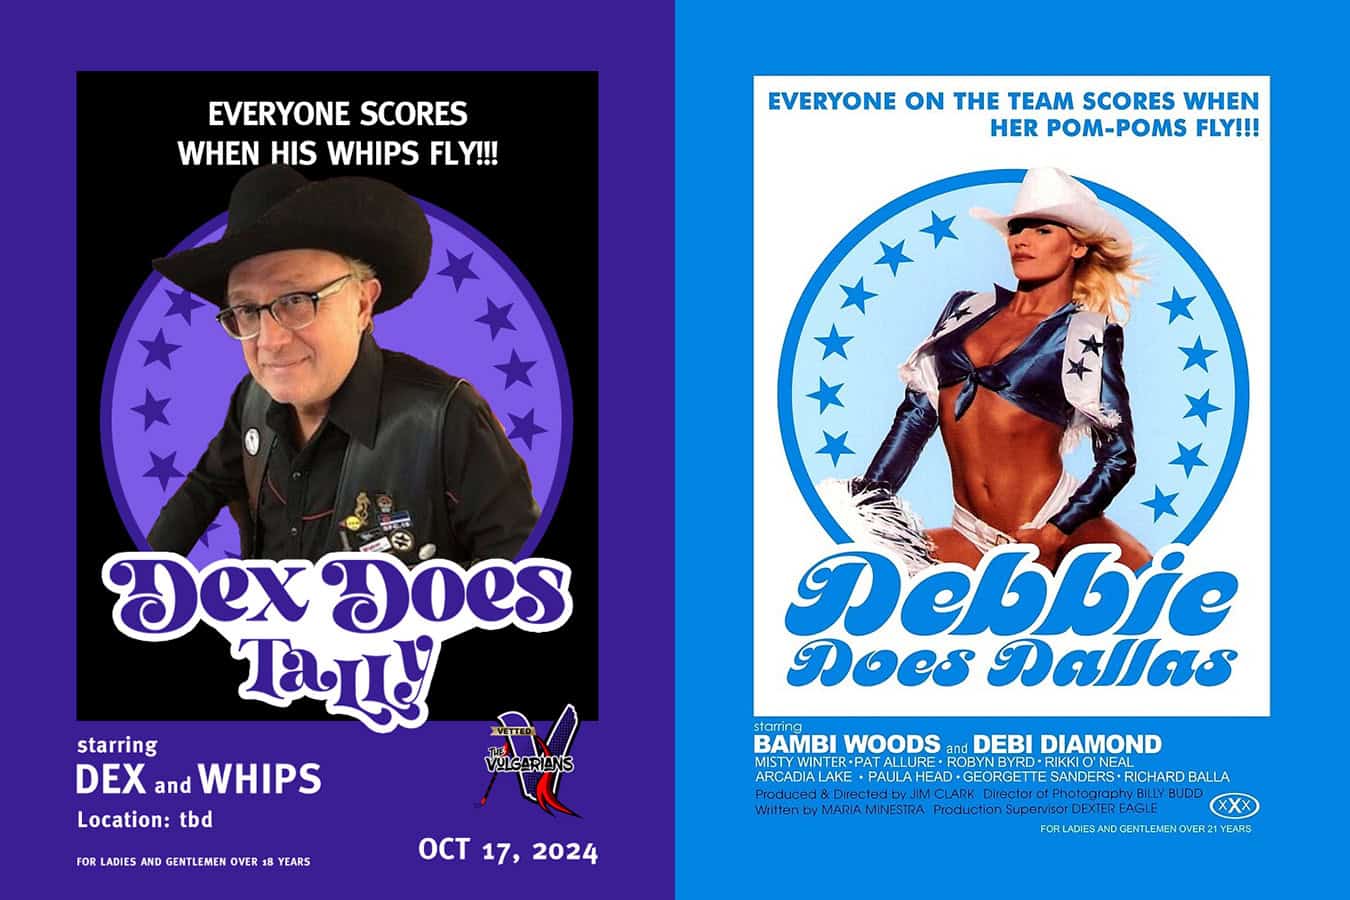 Dex Does Tally and Debbie Does Dallas